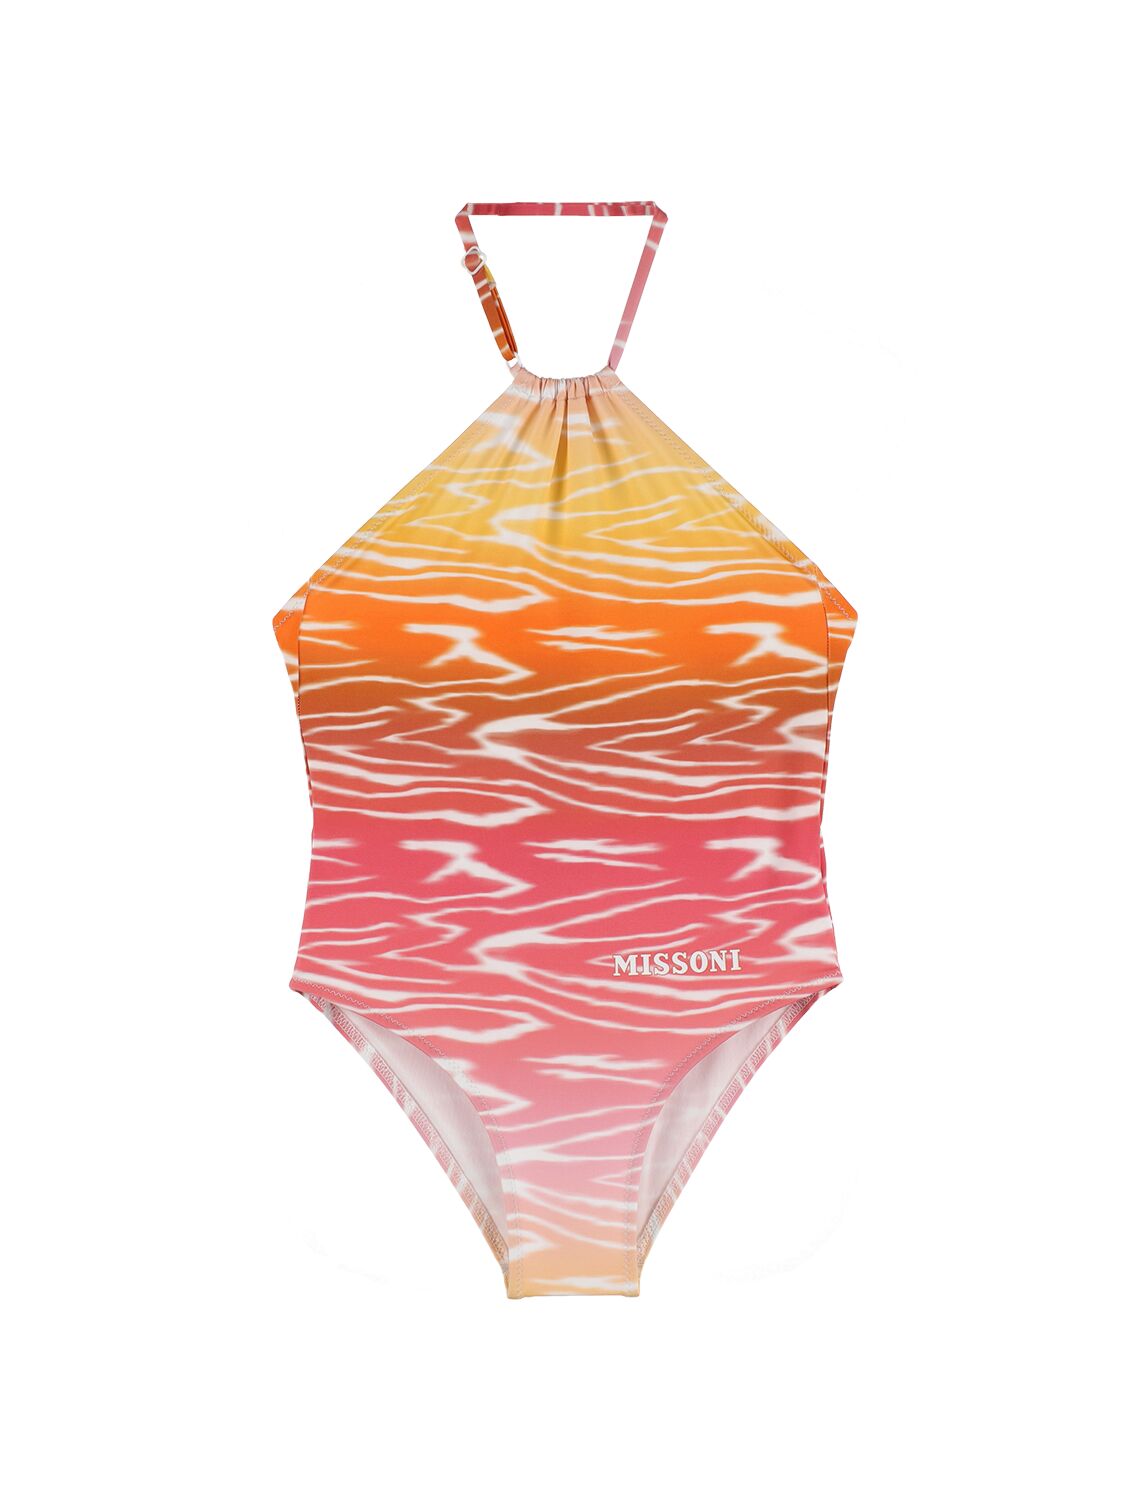 Missoni Kids' Printed Jersey One Piece Swimsuit In Pink,multi